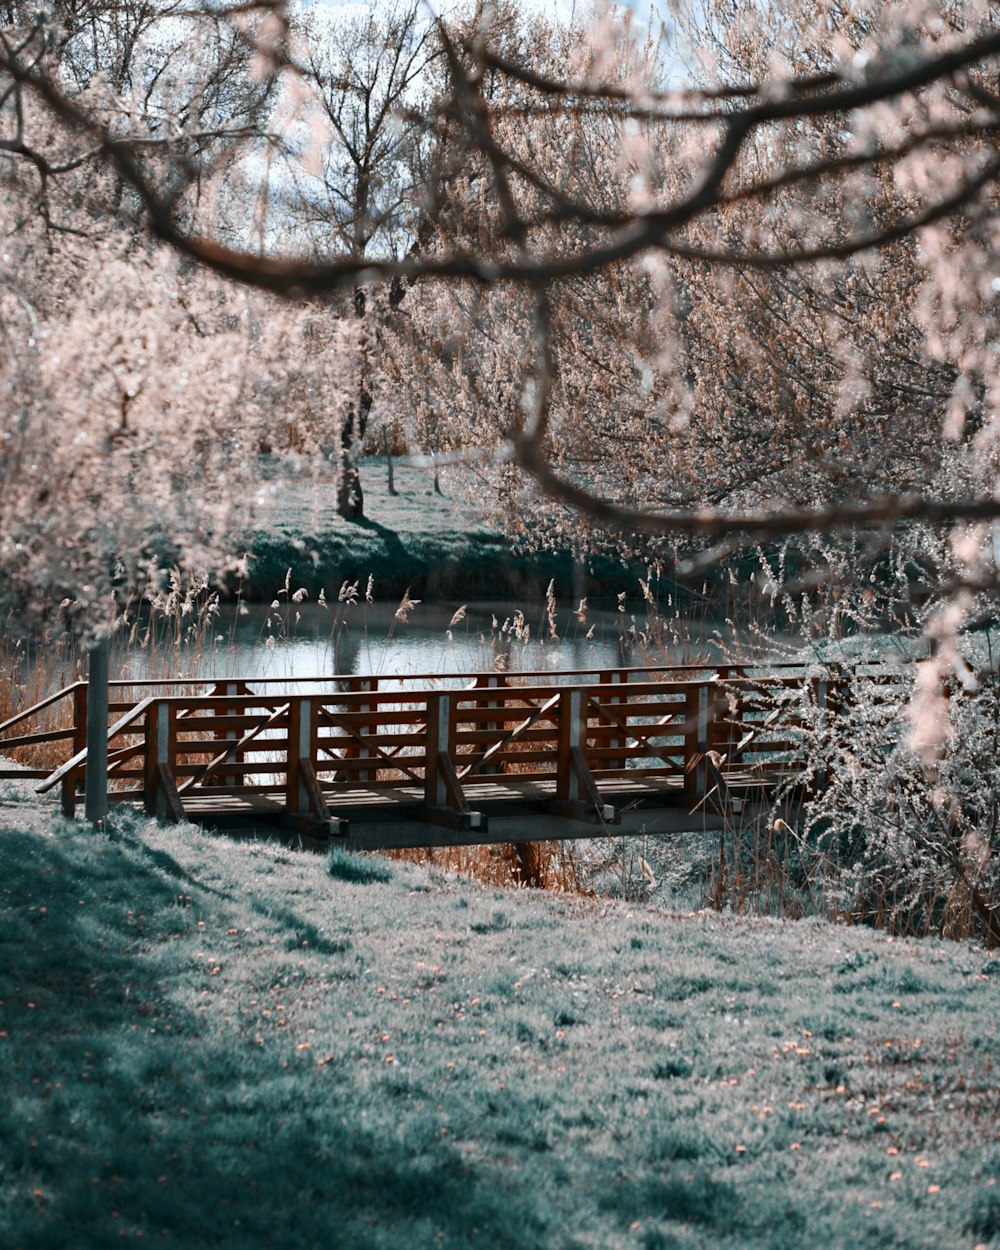 a wooden bridge over a body of water